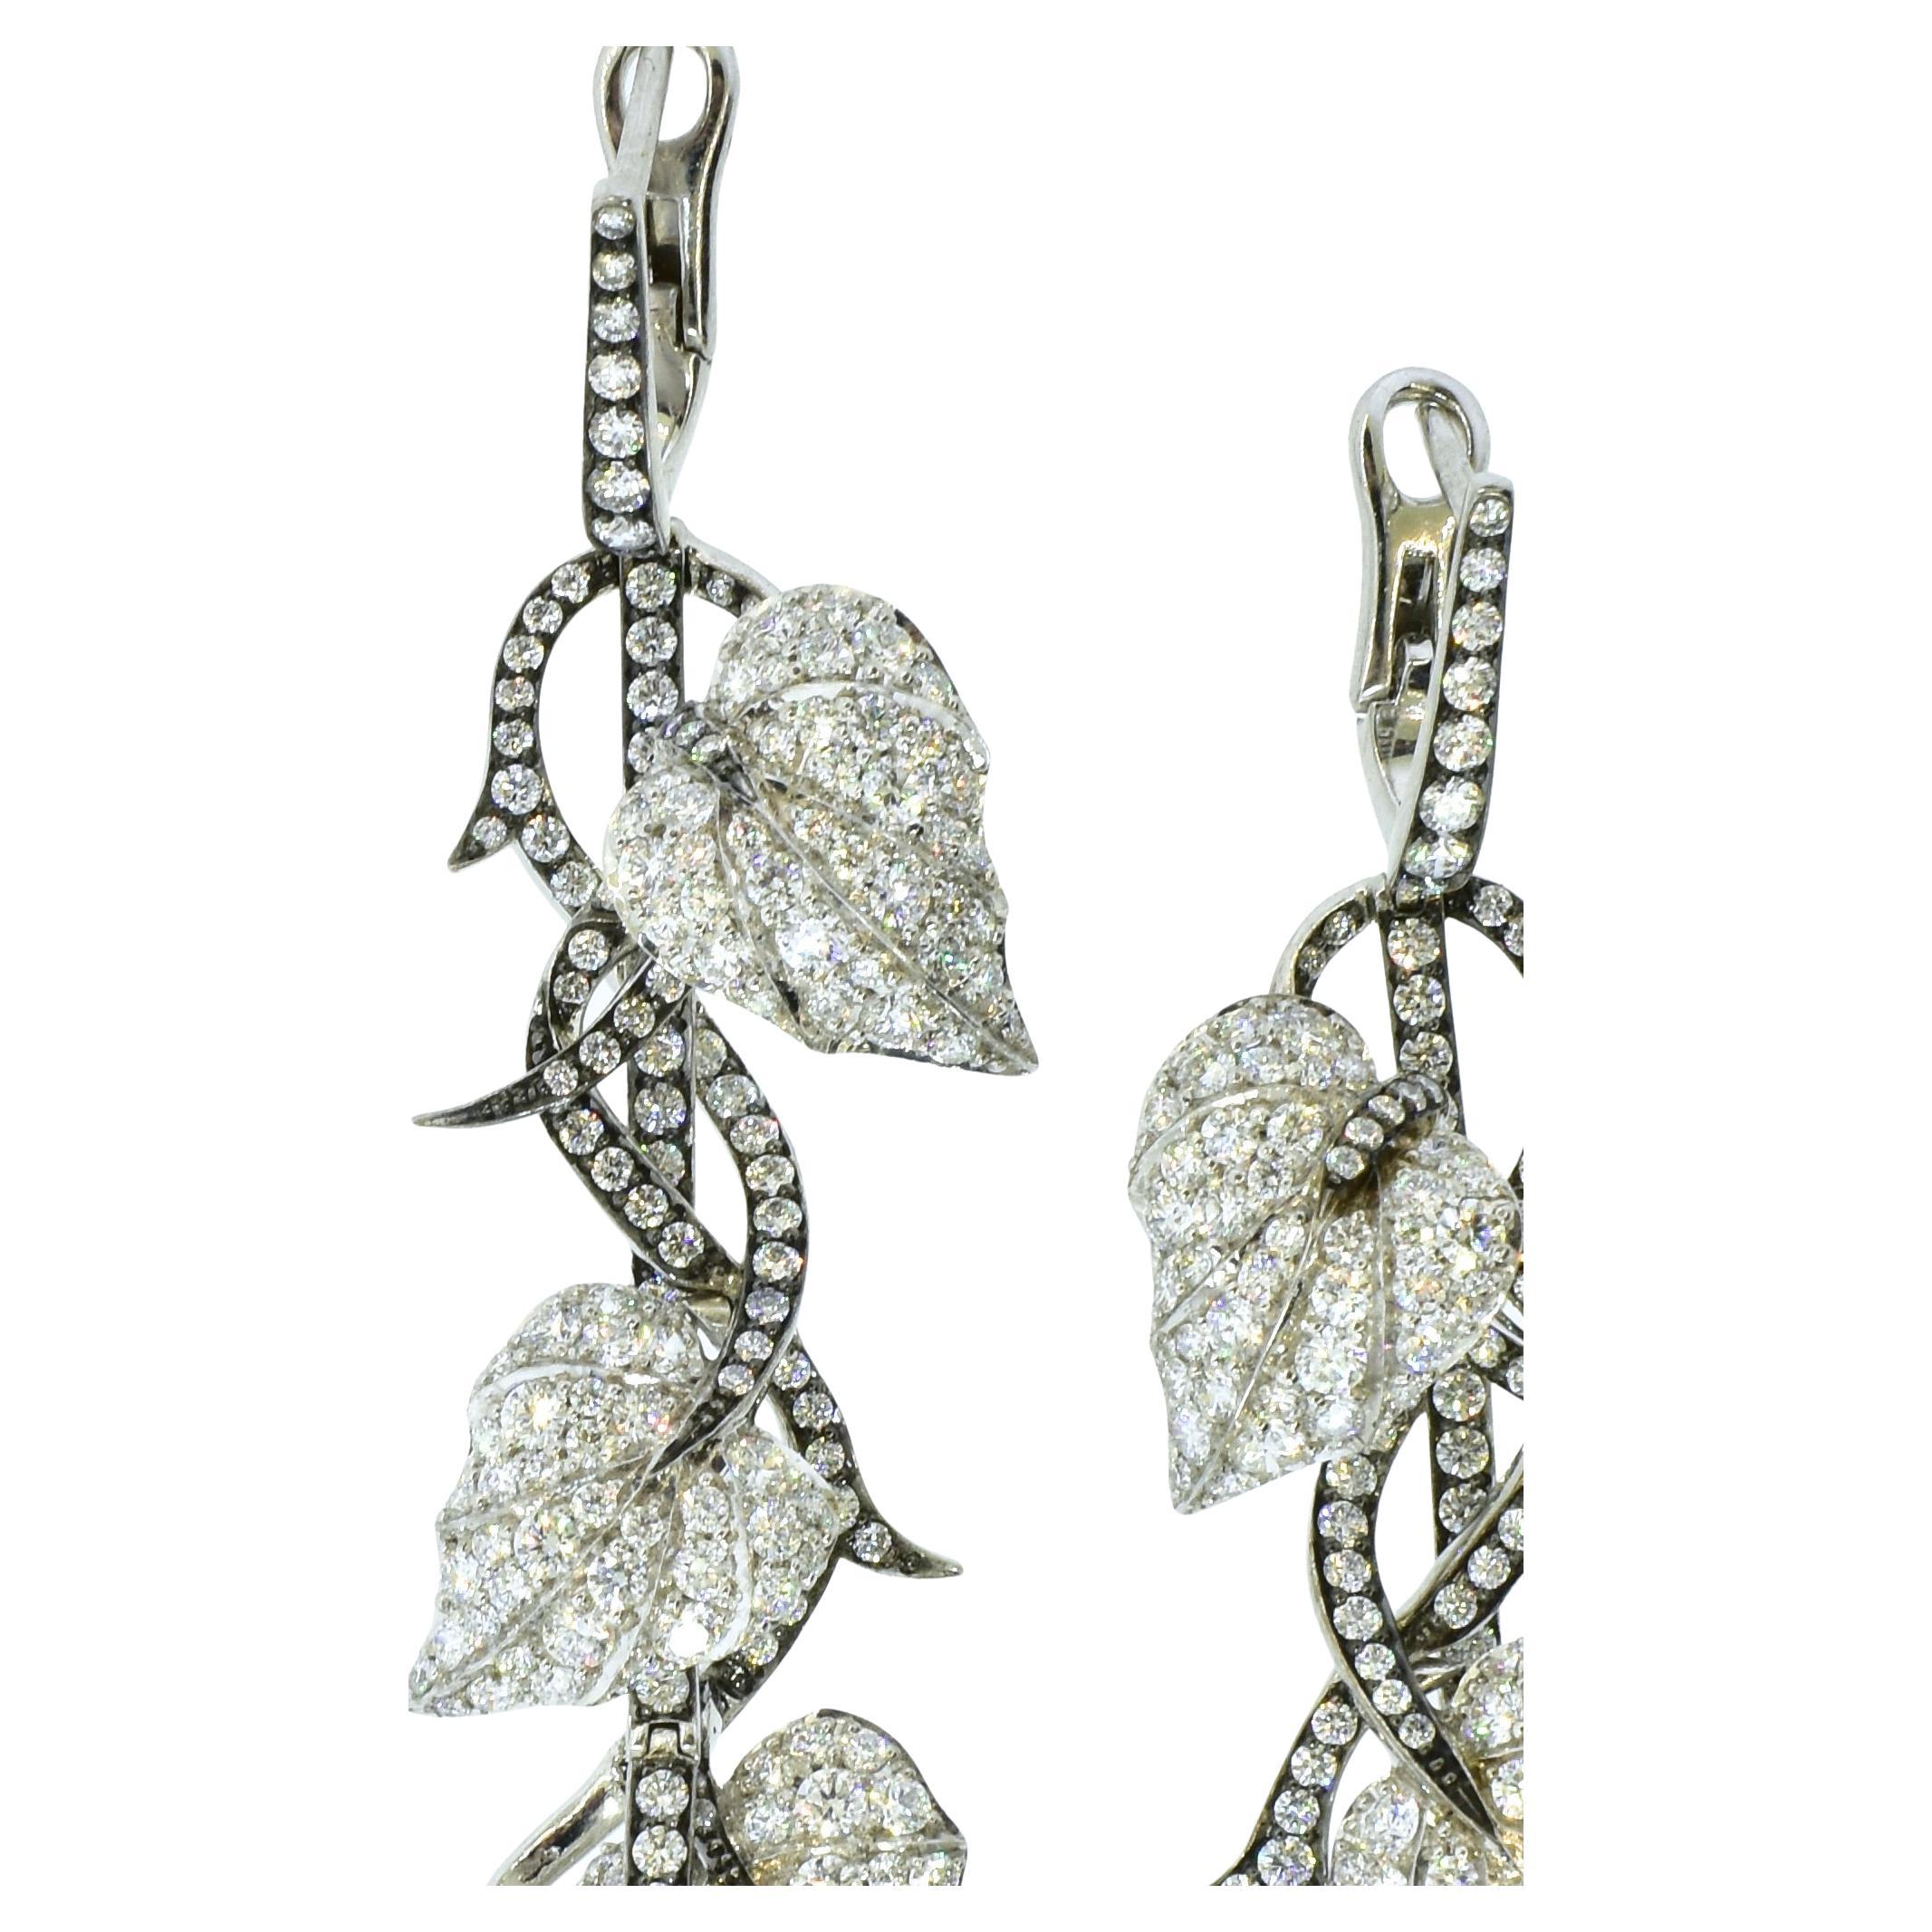 Stephen Webster Rubellite and Diamond Dramatic Hanging Earrings, London, c. 2022 In Excellent Condition For Sale In Aspen, CO